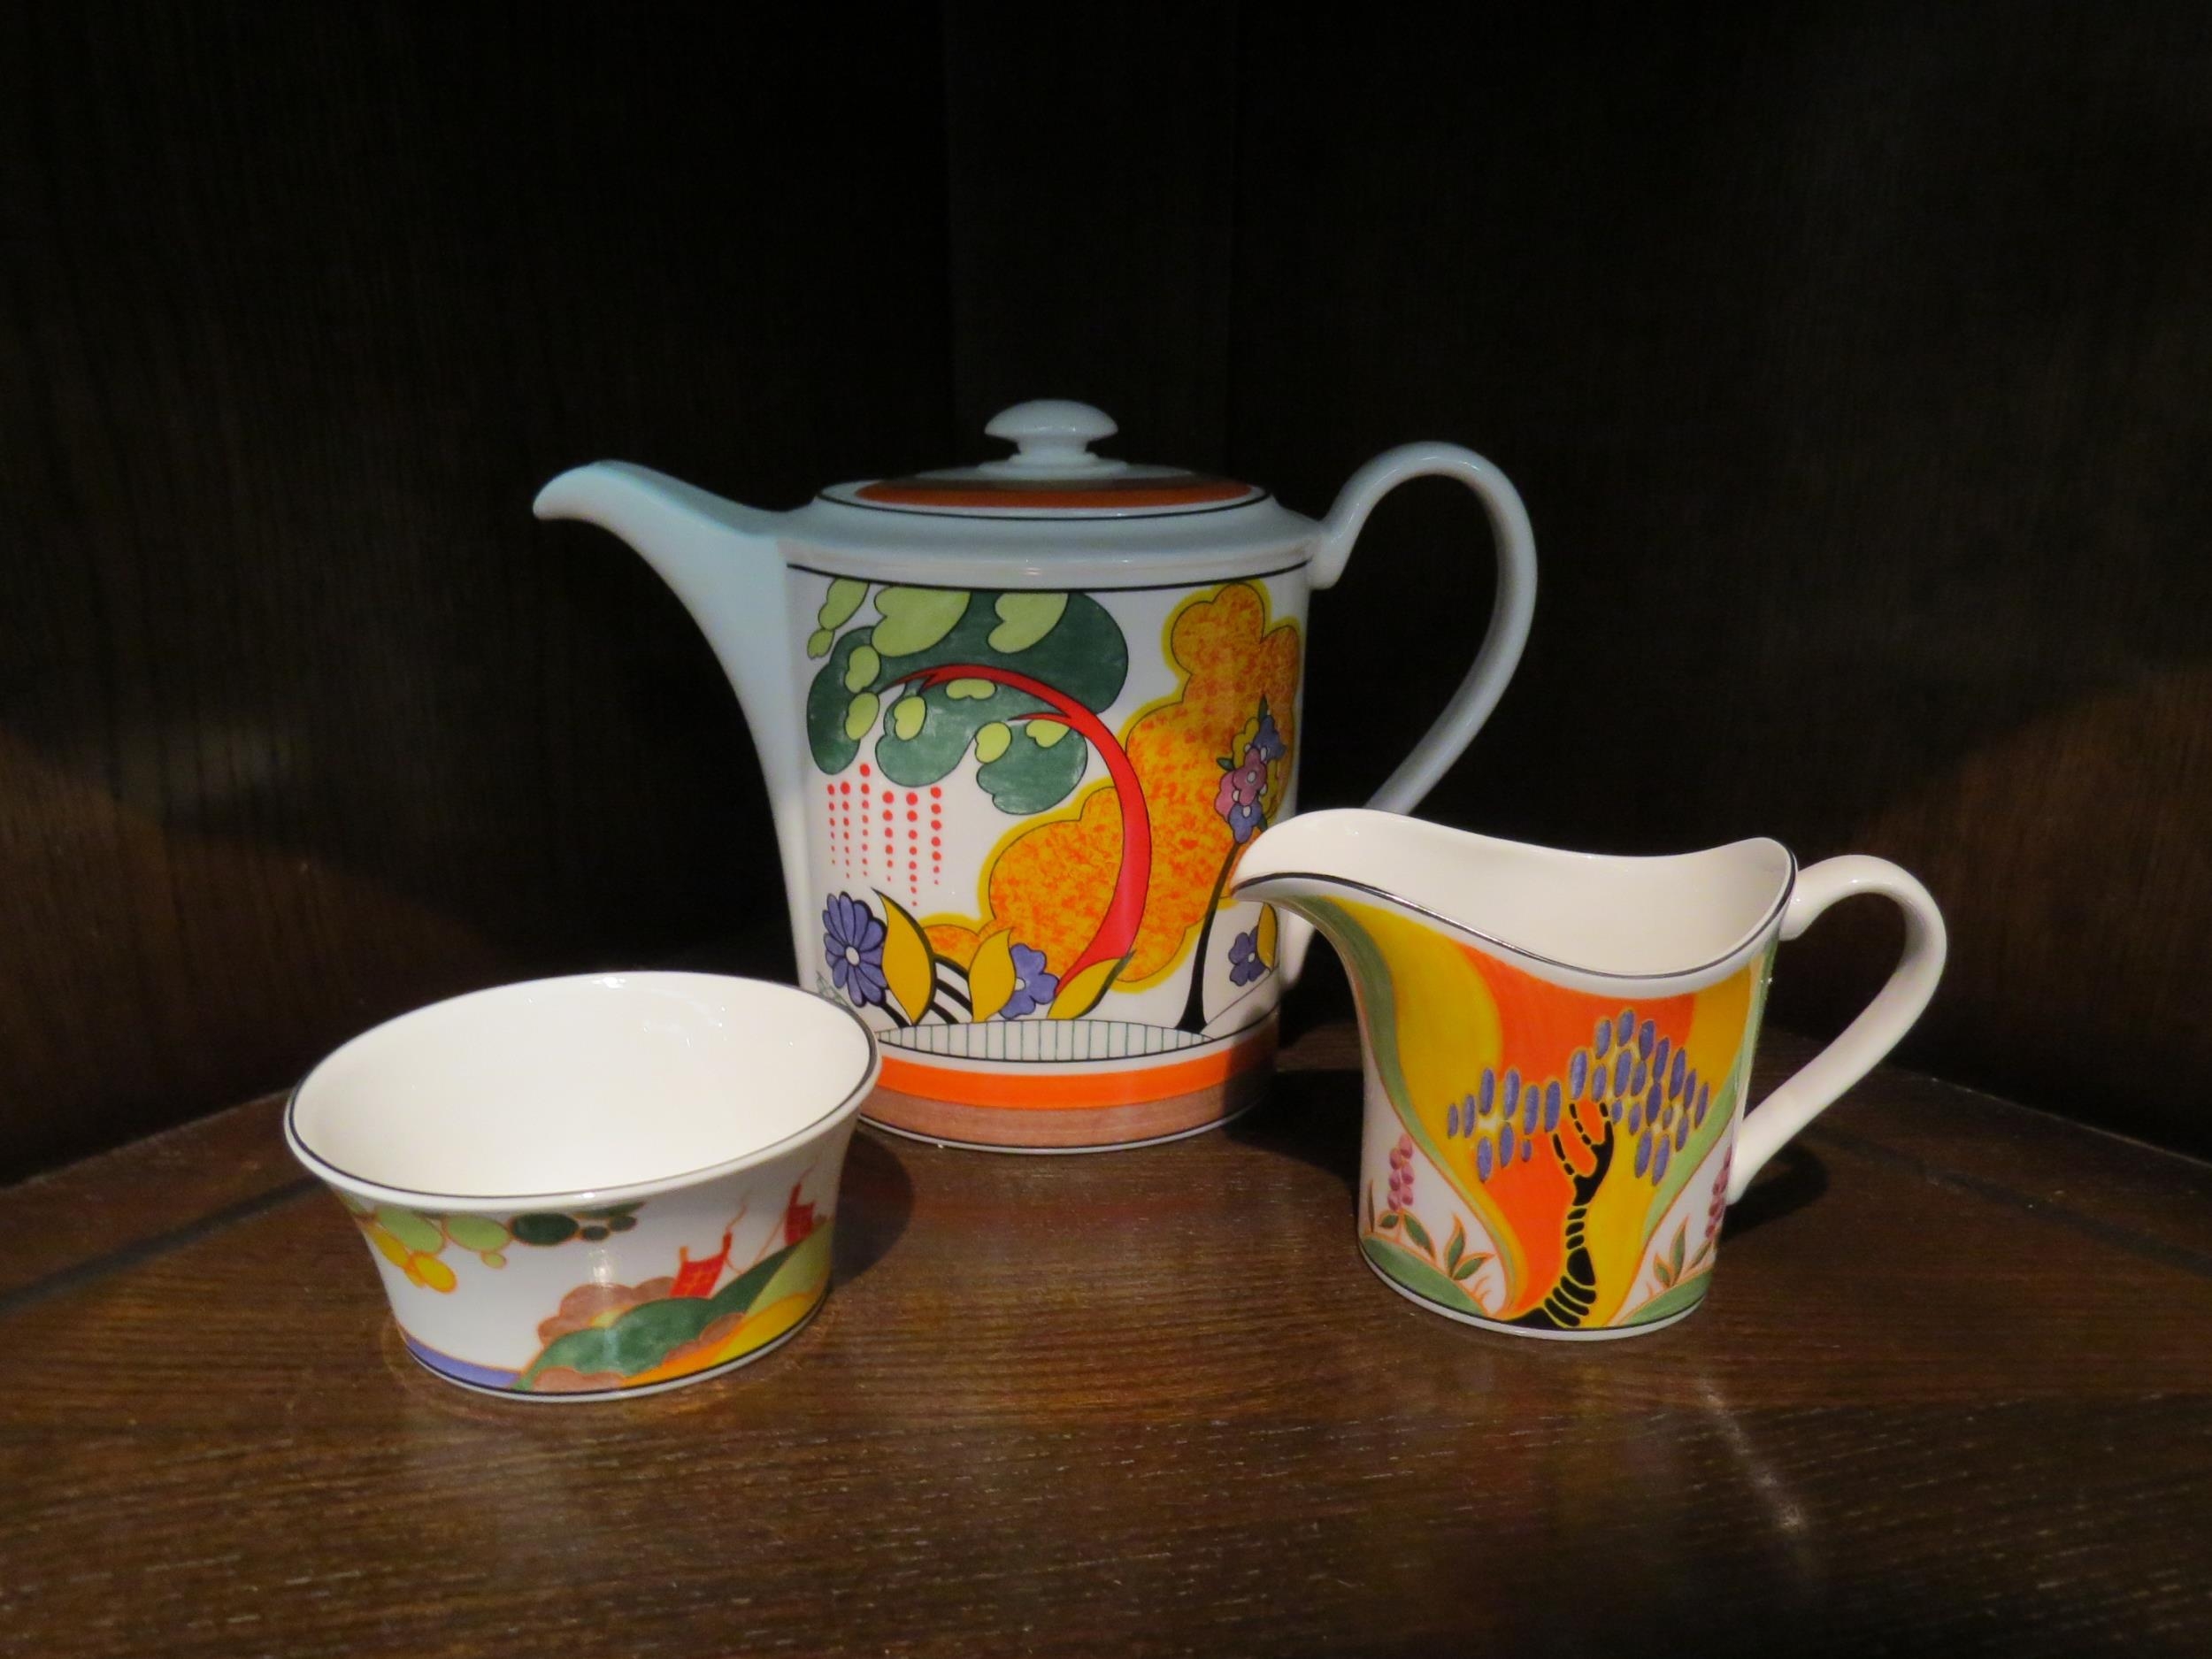 A Wedgwood Clarice Cliff harlequin coffee set consisting of coffee pot, sucrier, milk jug and - Image 3 of 3